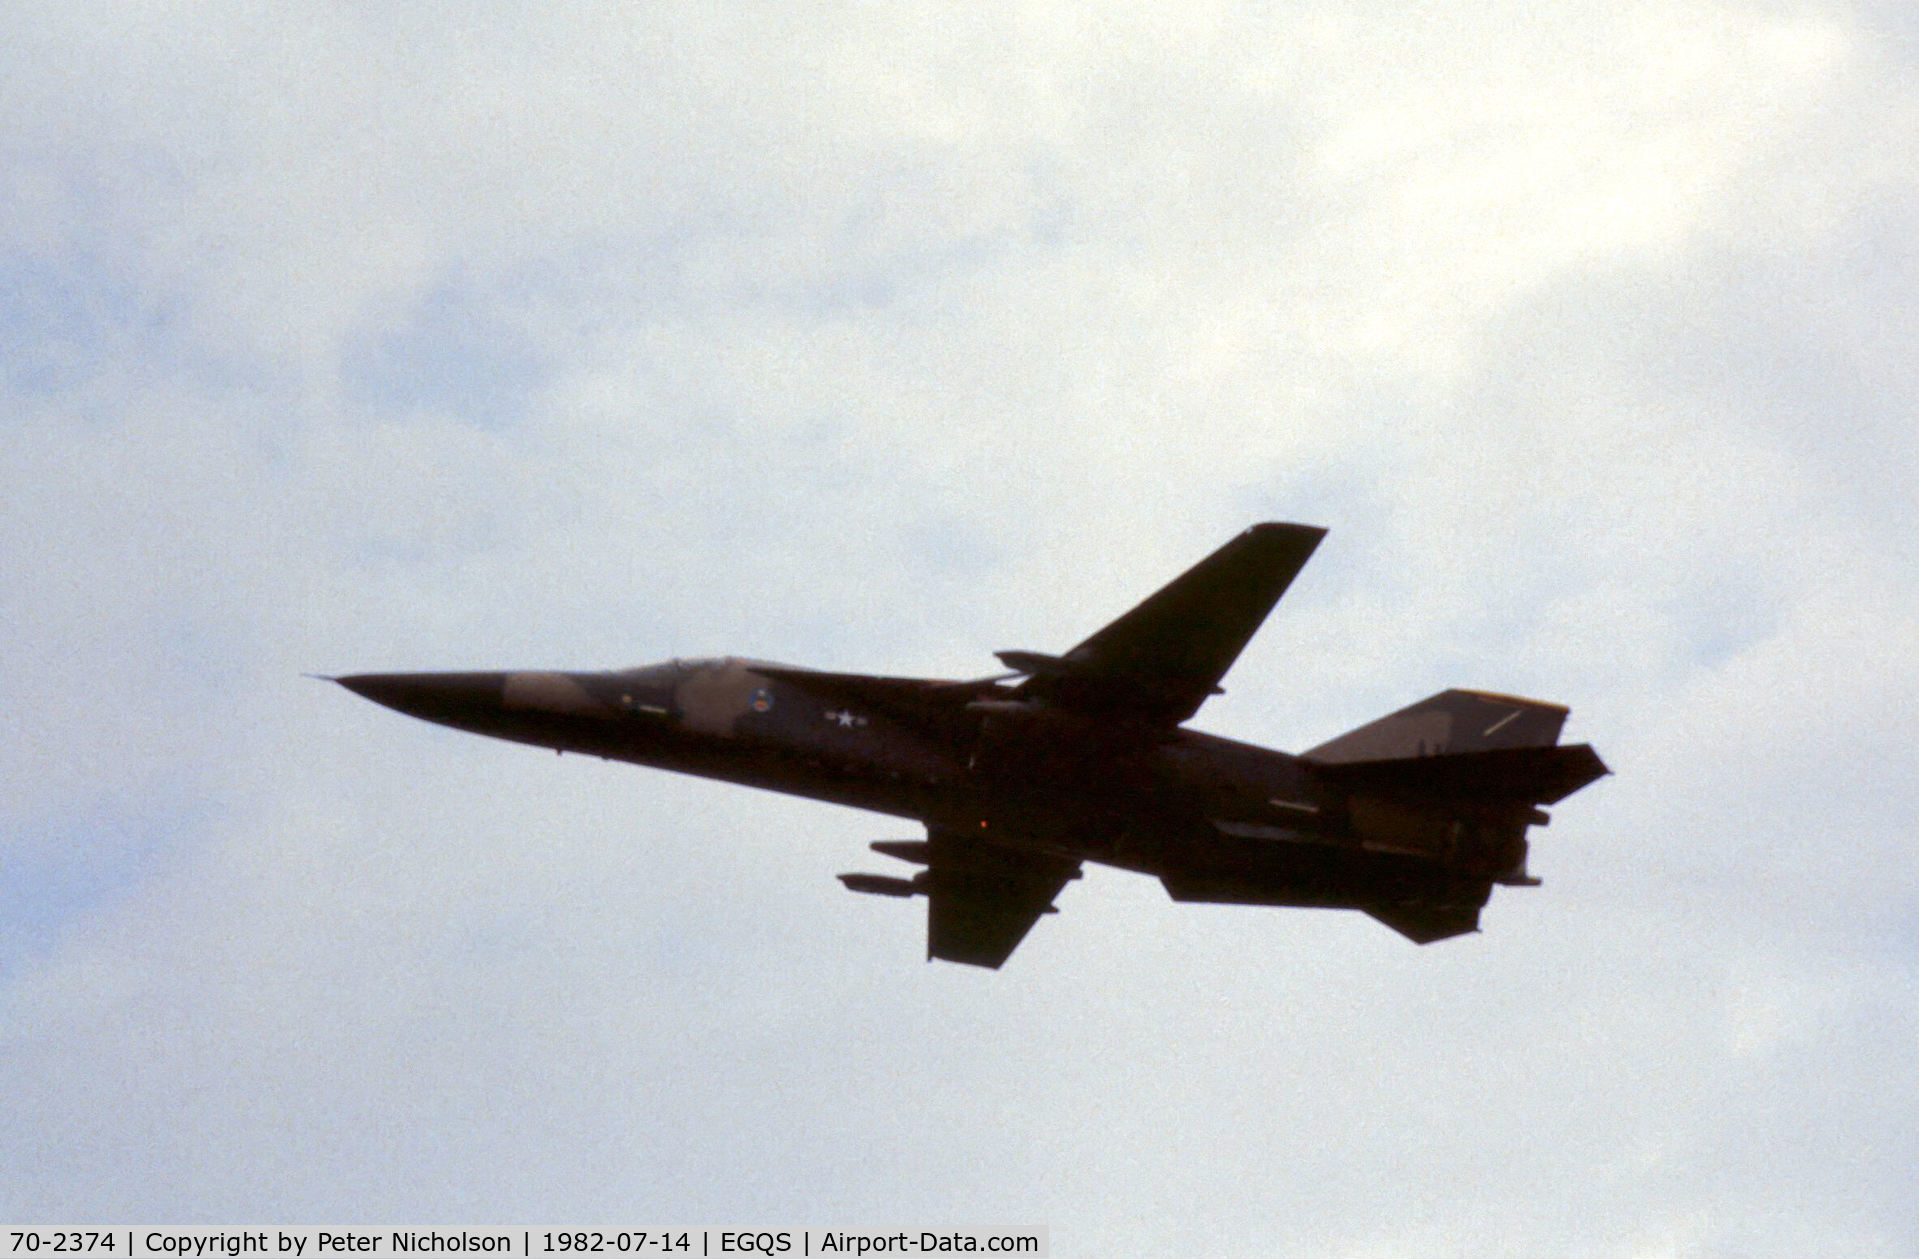 70-2374, 1970 General Dynamics F-111F Aardvark C/N E2-13, F-111F of 492nd Tactical Fighter Squadron of RAF Lakenheath's 48th Tactical Fighter Wing on a practice approach to RAF Lossiemouth in the Summer of 1982.